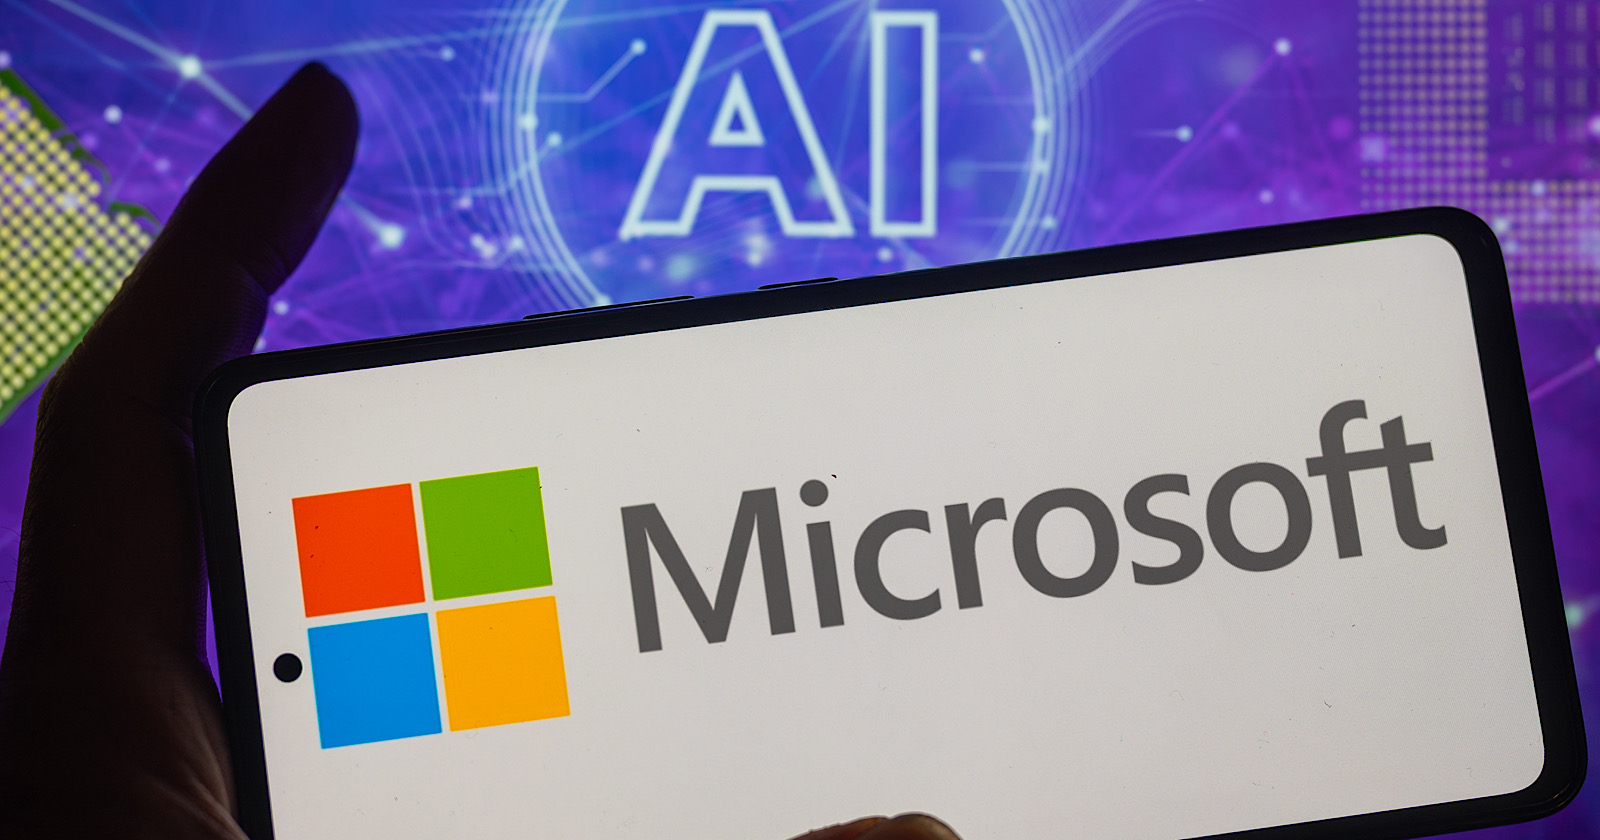 Microsoft's AI Ad Plans Revealed Through New App Deal